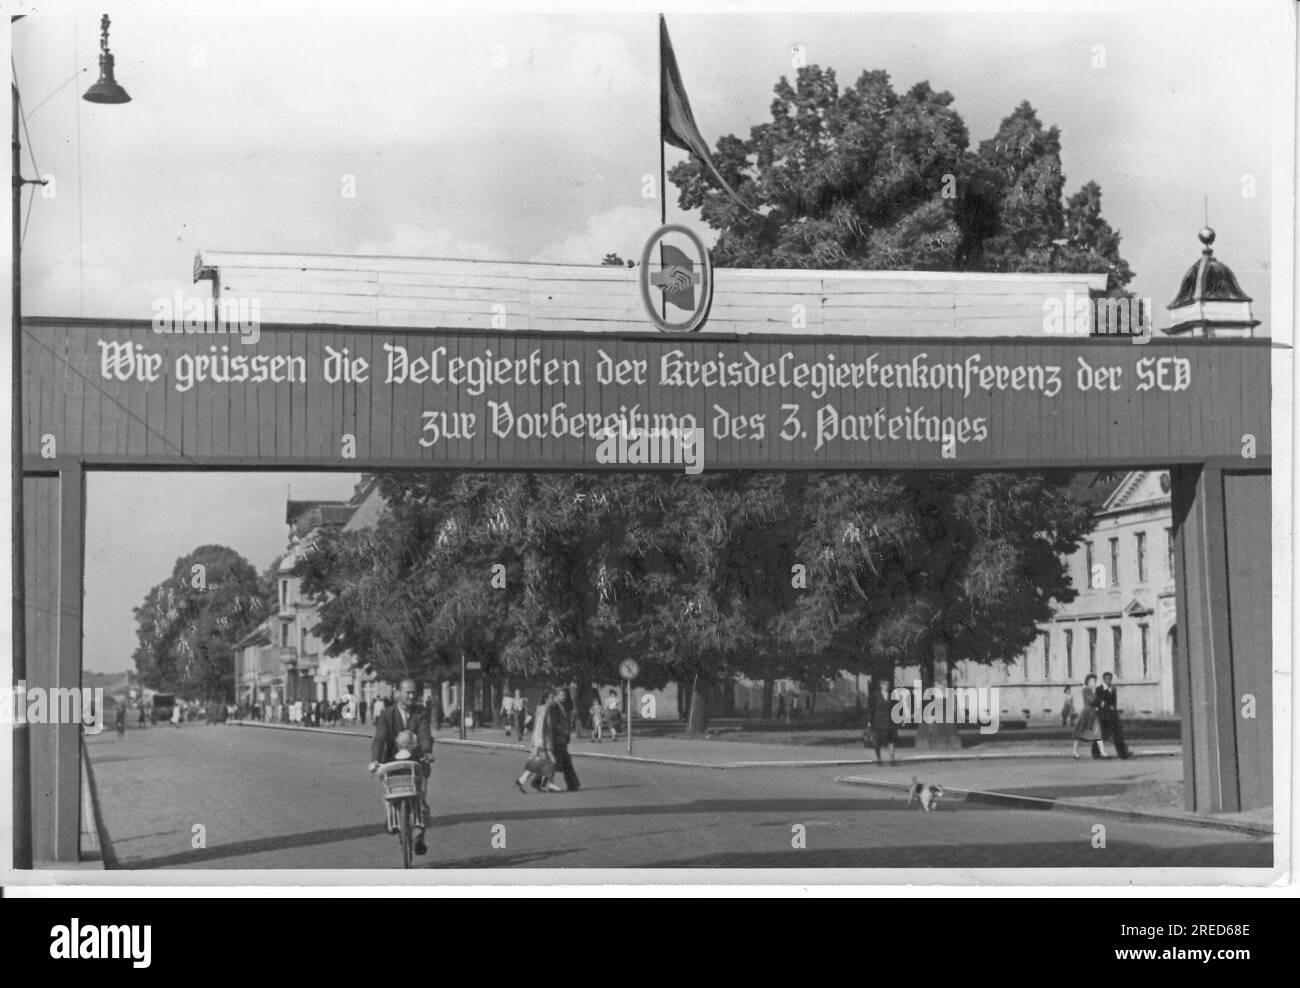 This new building across Karl-Marx-Strasse in Neuruppin, announces the district delegates' conference of the SED. Photo: MAZ/Archive, 21.06.1950 [automated translation] Stock Photo